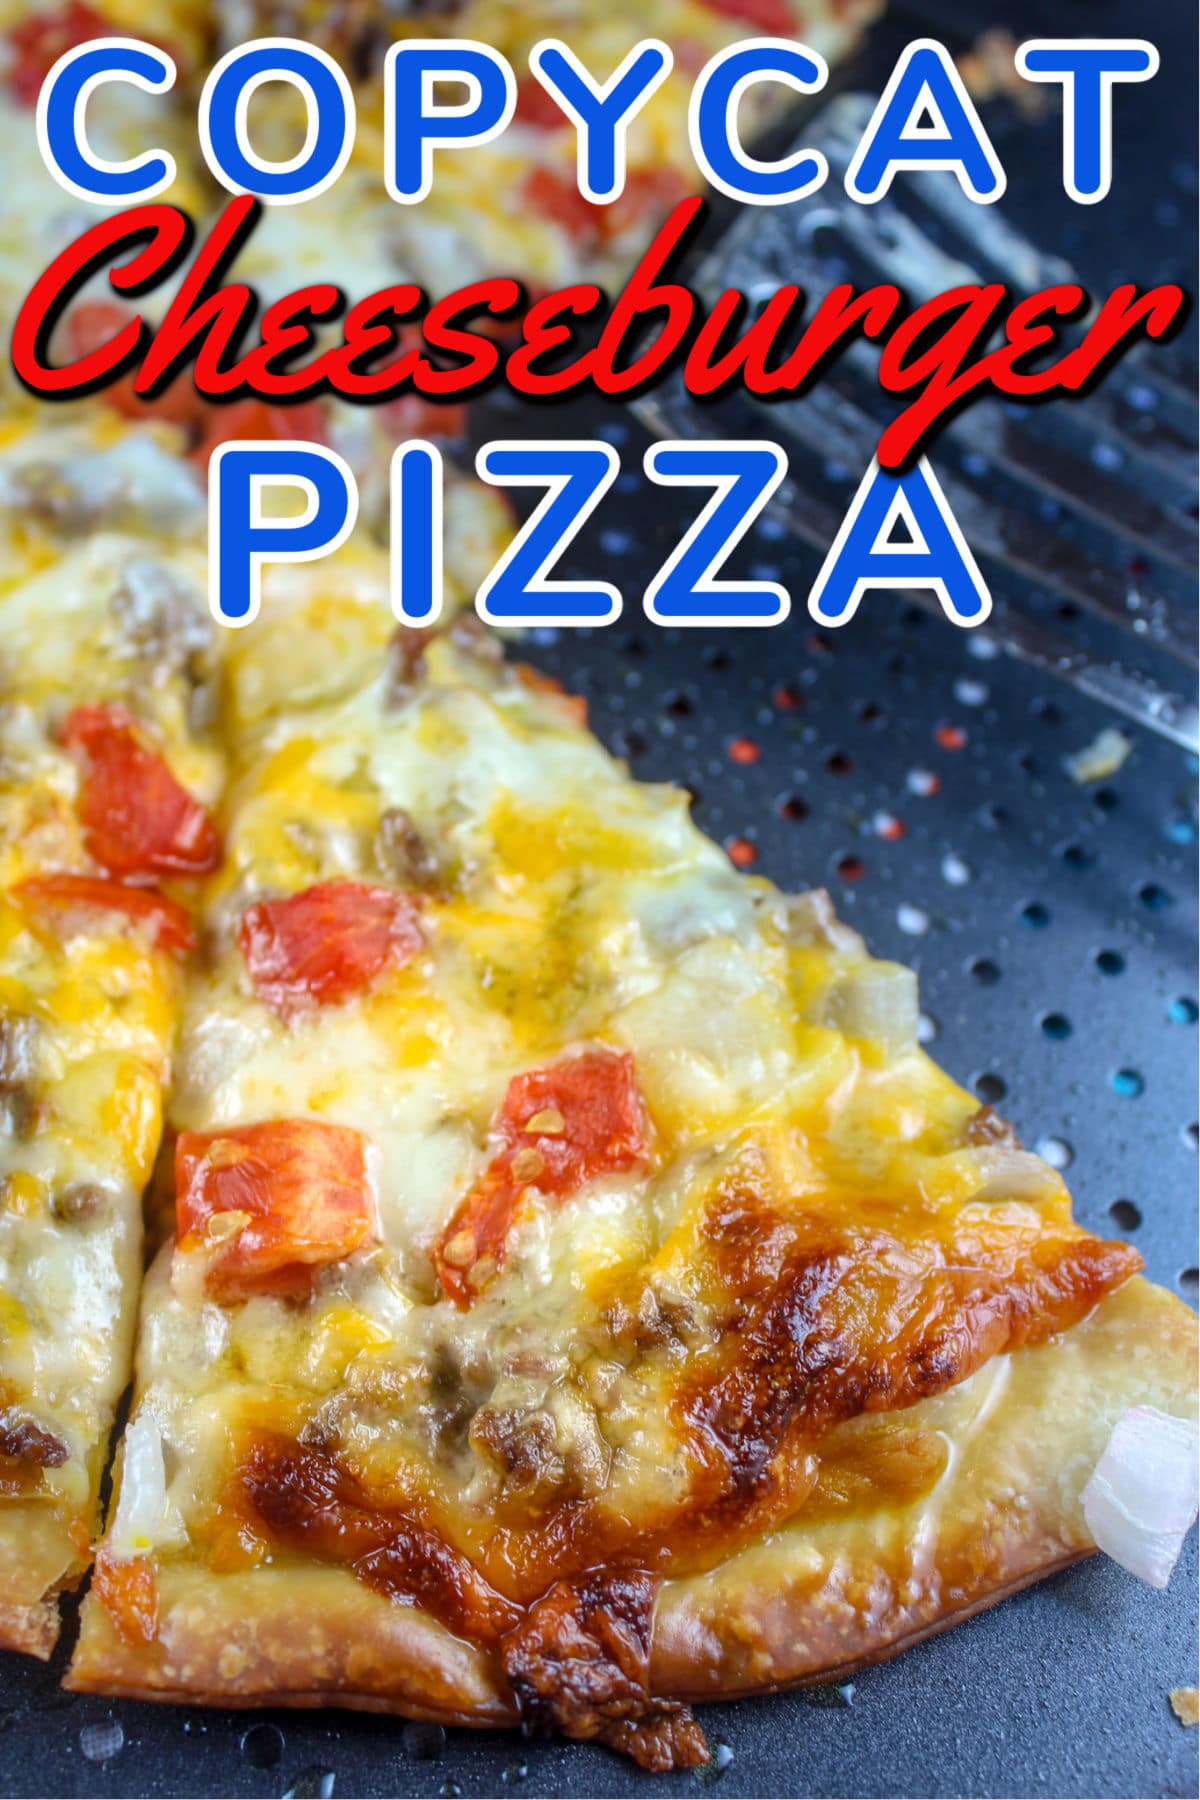 If you've watched TV in the past month - you've seen the commercials for Domino's two new pizzas - the Cheeseburger and Chicken Taco Pizzas. The Cheeseburger Pizza was calling my name and I had to try it. Loved it! So then - I had to make it for you guys! via @foodhussy